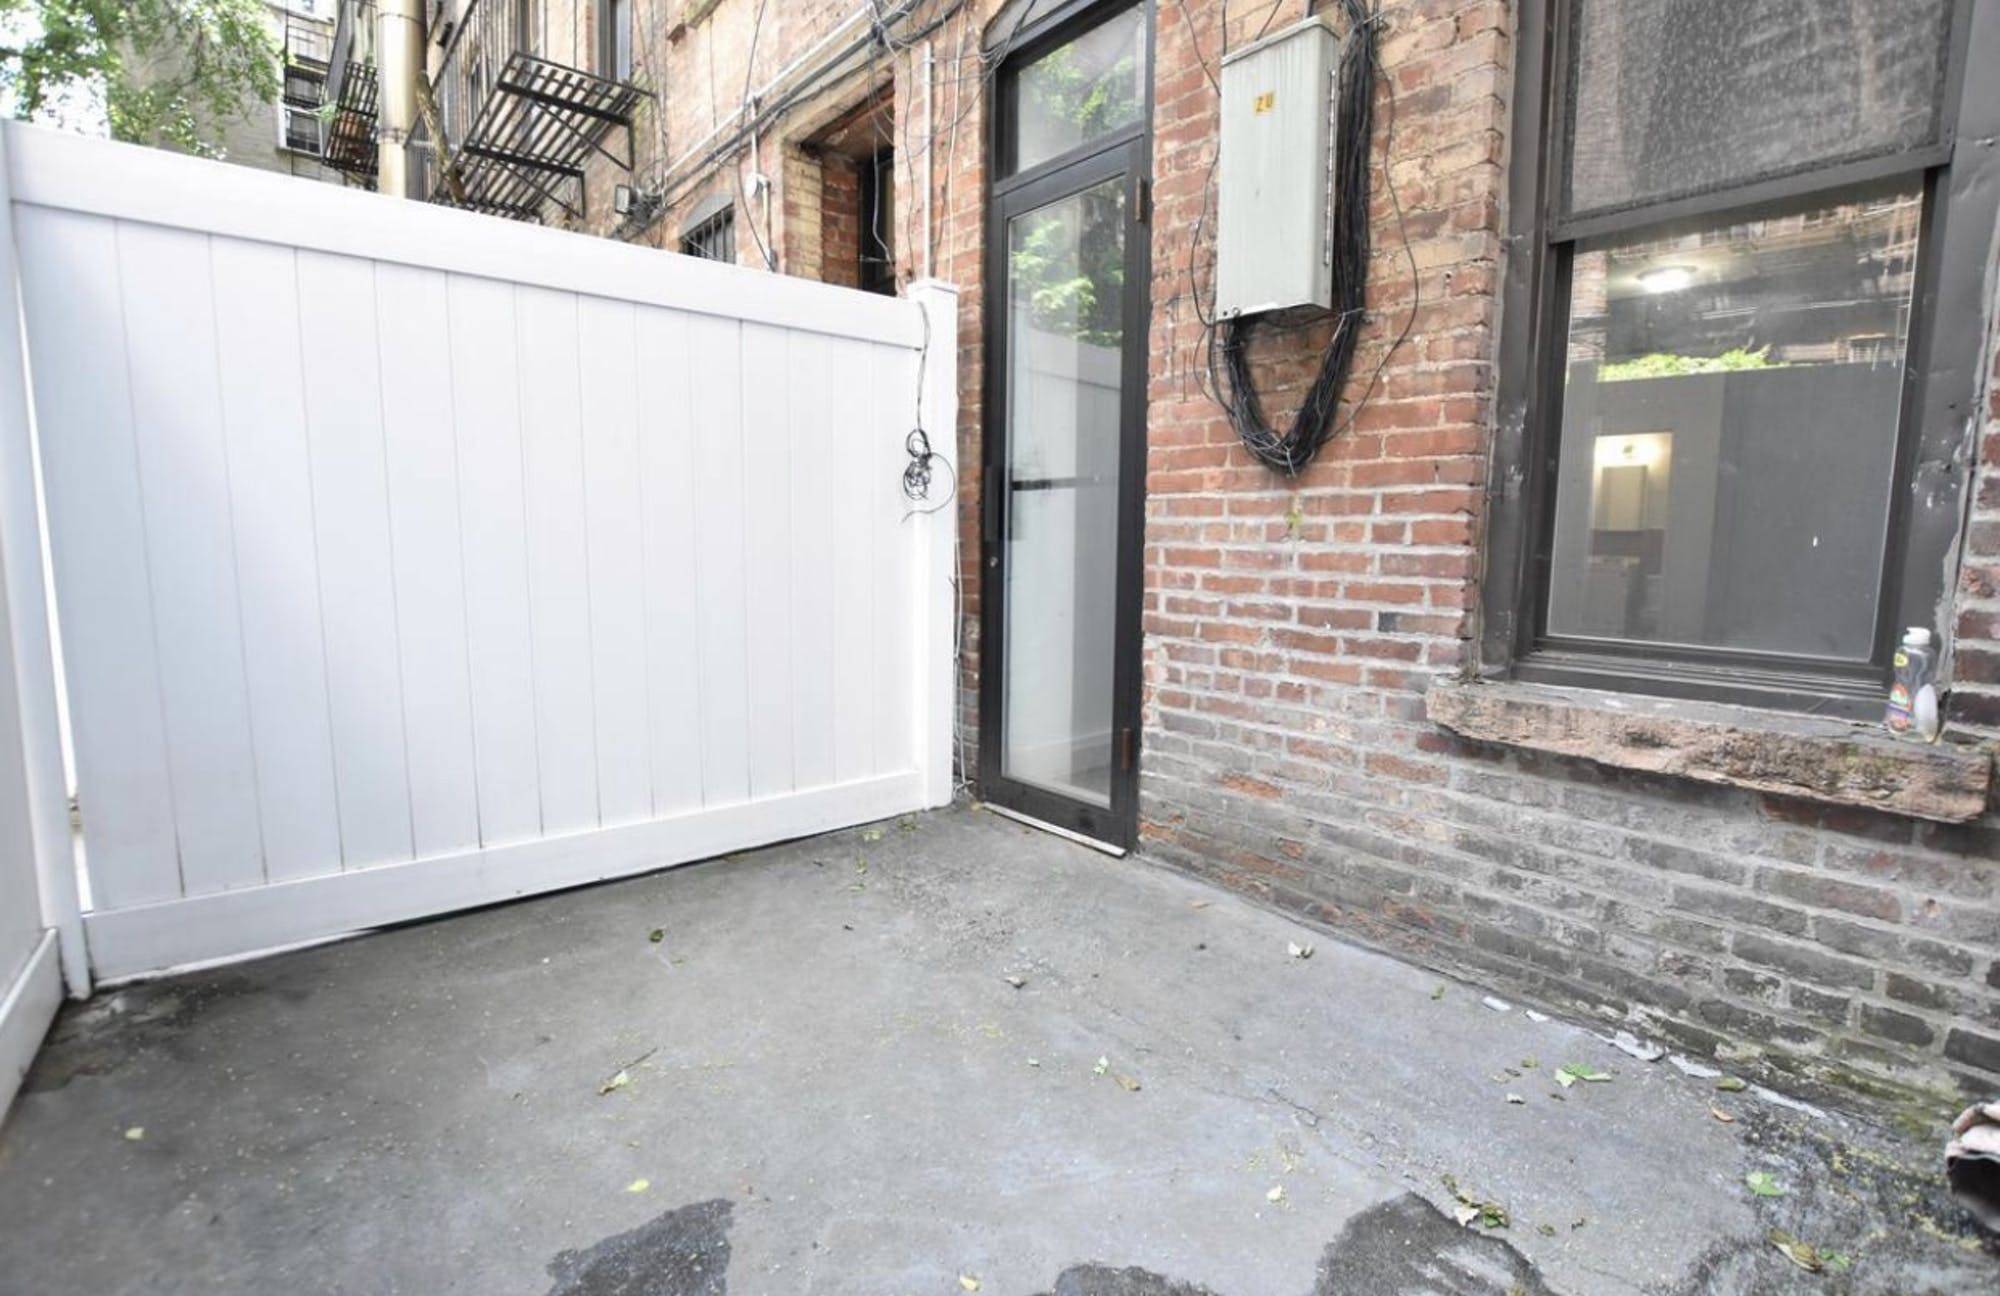 VIRTUAL TOURS AVAILABLE NO FEE 2 WEEKS FREE RENT Welcome to 437 W 46th Street, At this trying time It's a luxury to have your own private outdoor space.